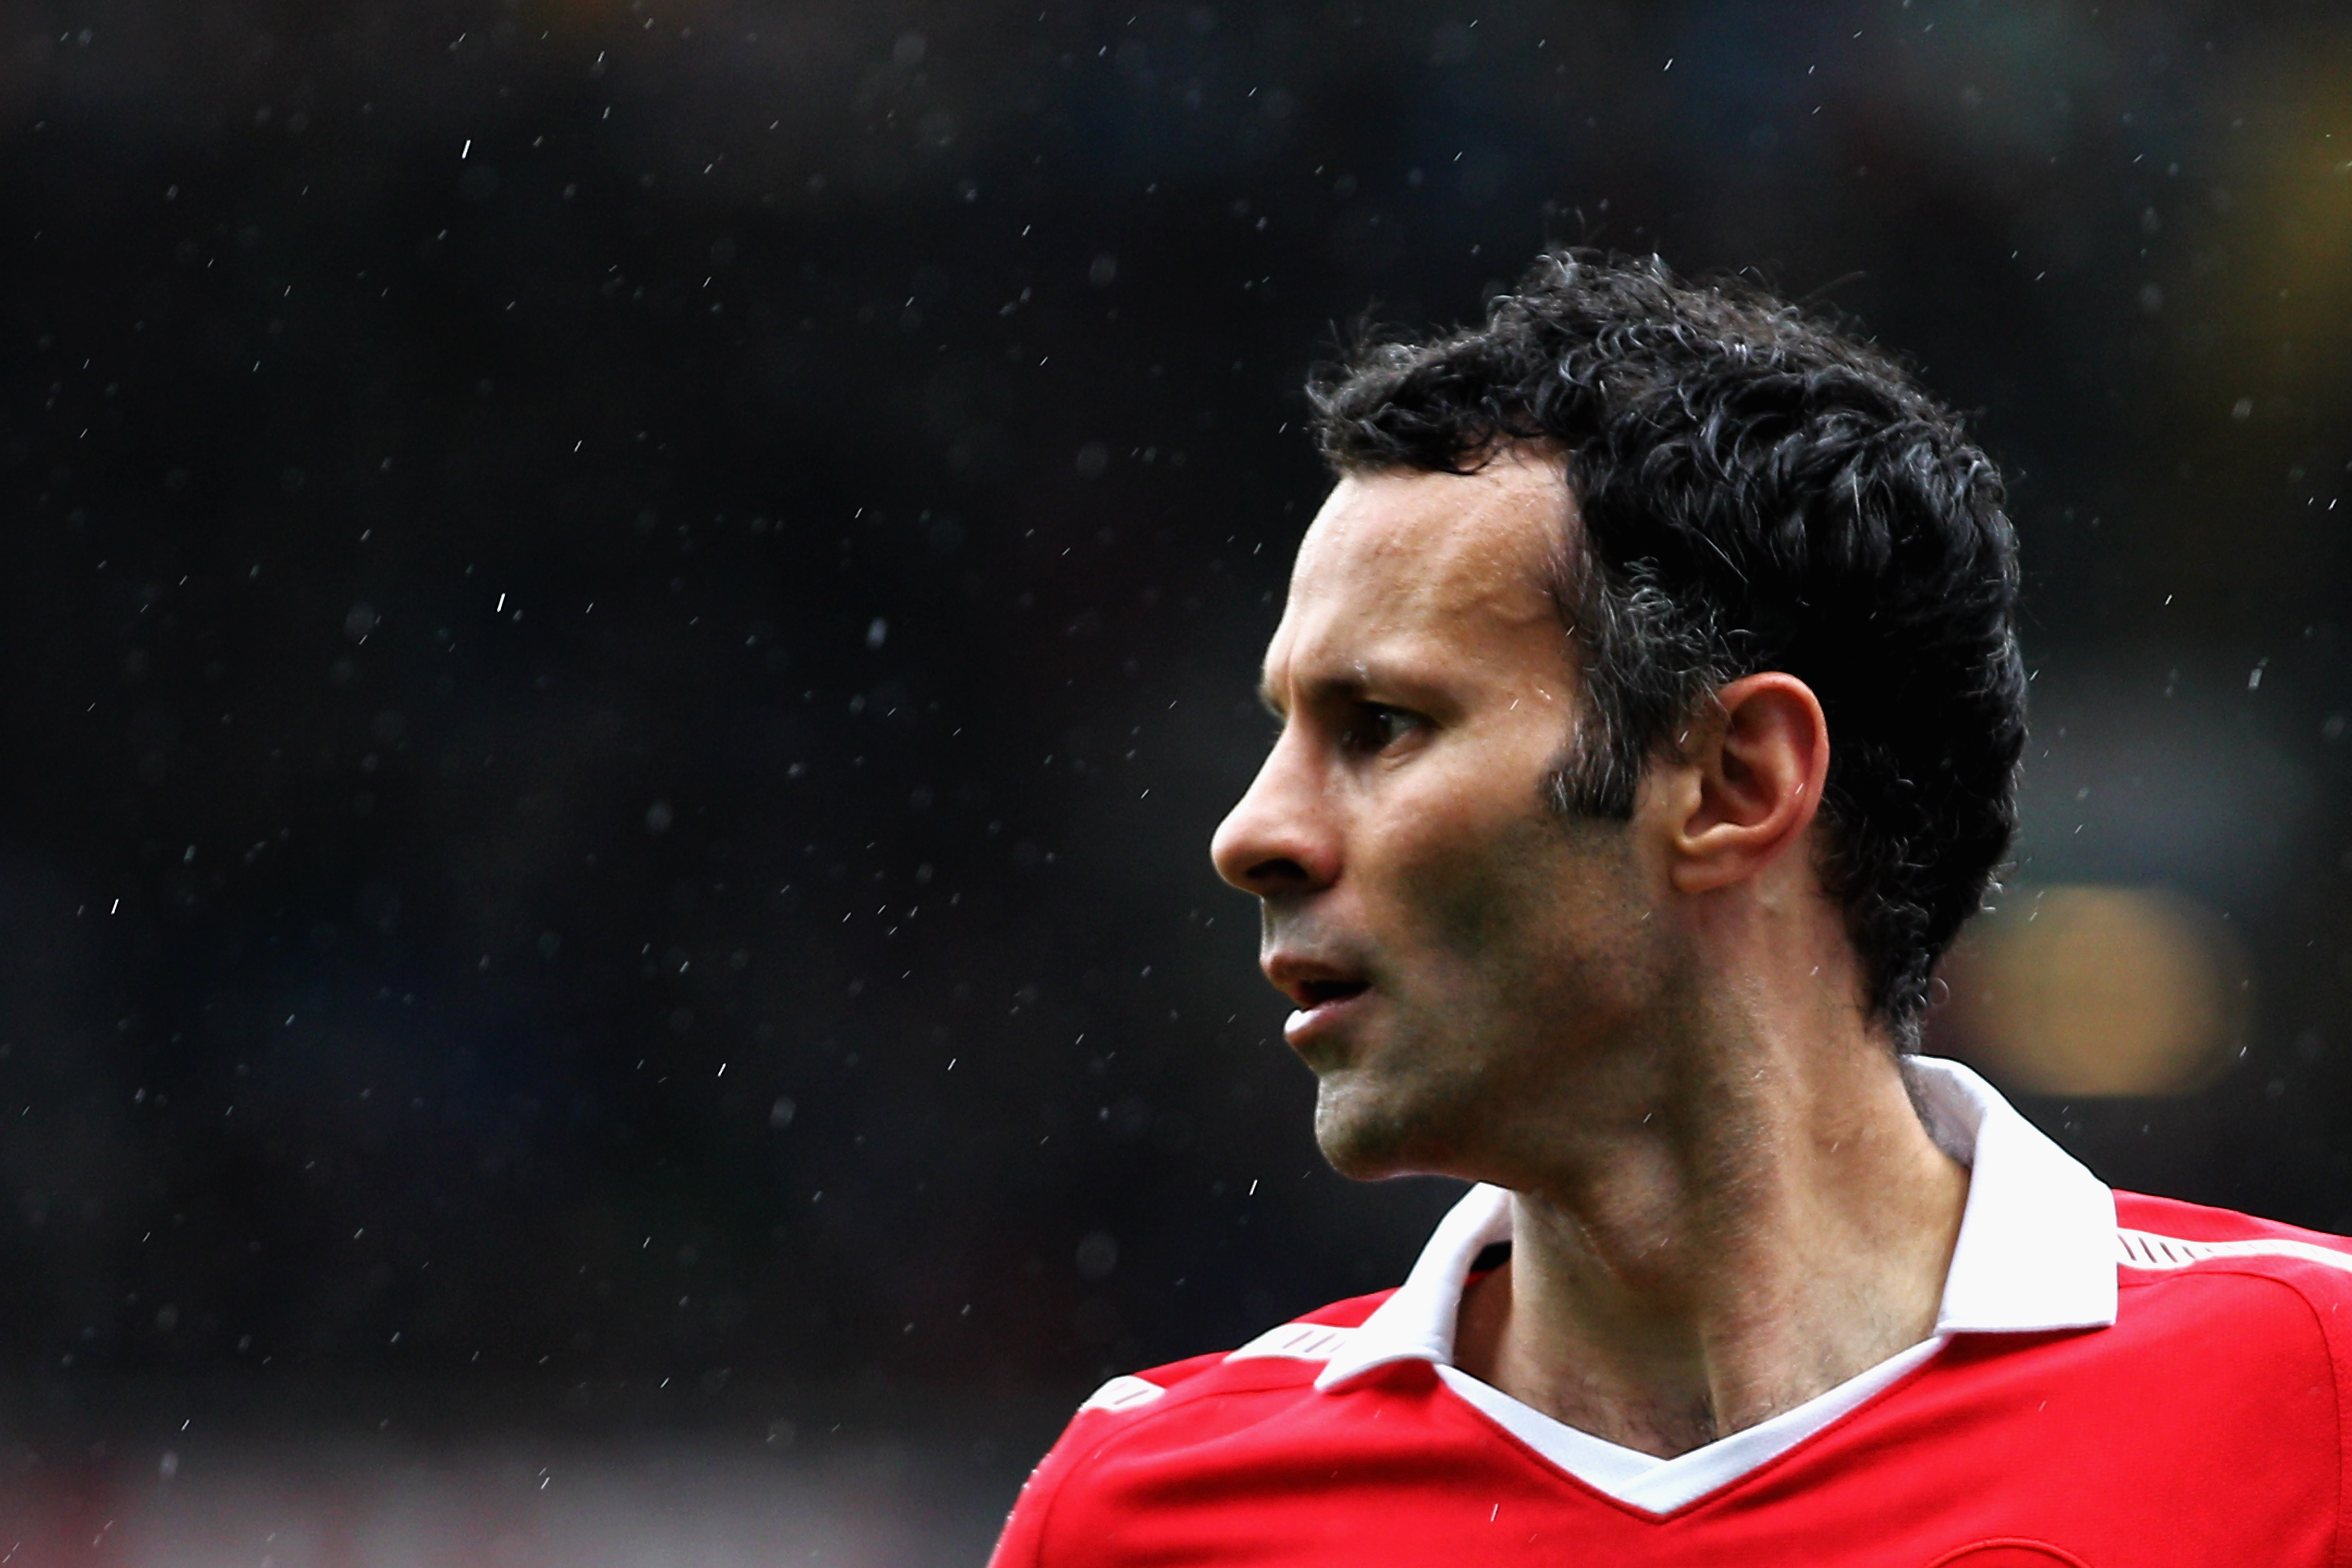 BLACKBURN, ENGLAND - MAY 14:  Ryan Giggs of Manchester United looks on during the Barclays Premier League match between Blackburn Rovers and Manchester United at Ewood park on May 14, 2011 in Blackburn, England.  (Photo by Dean Mouhtaropoulos/Getty Images